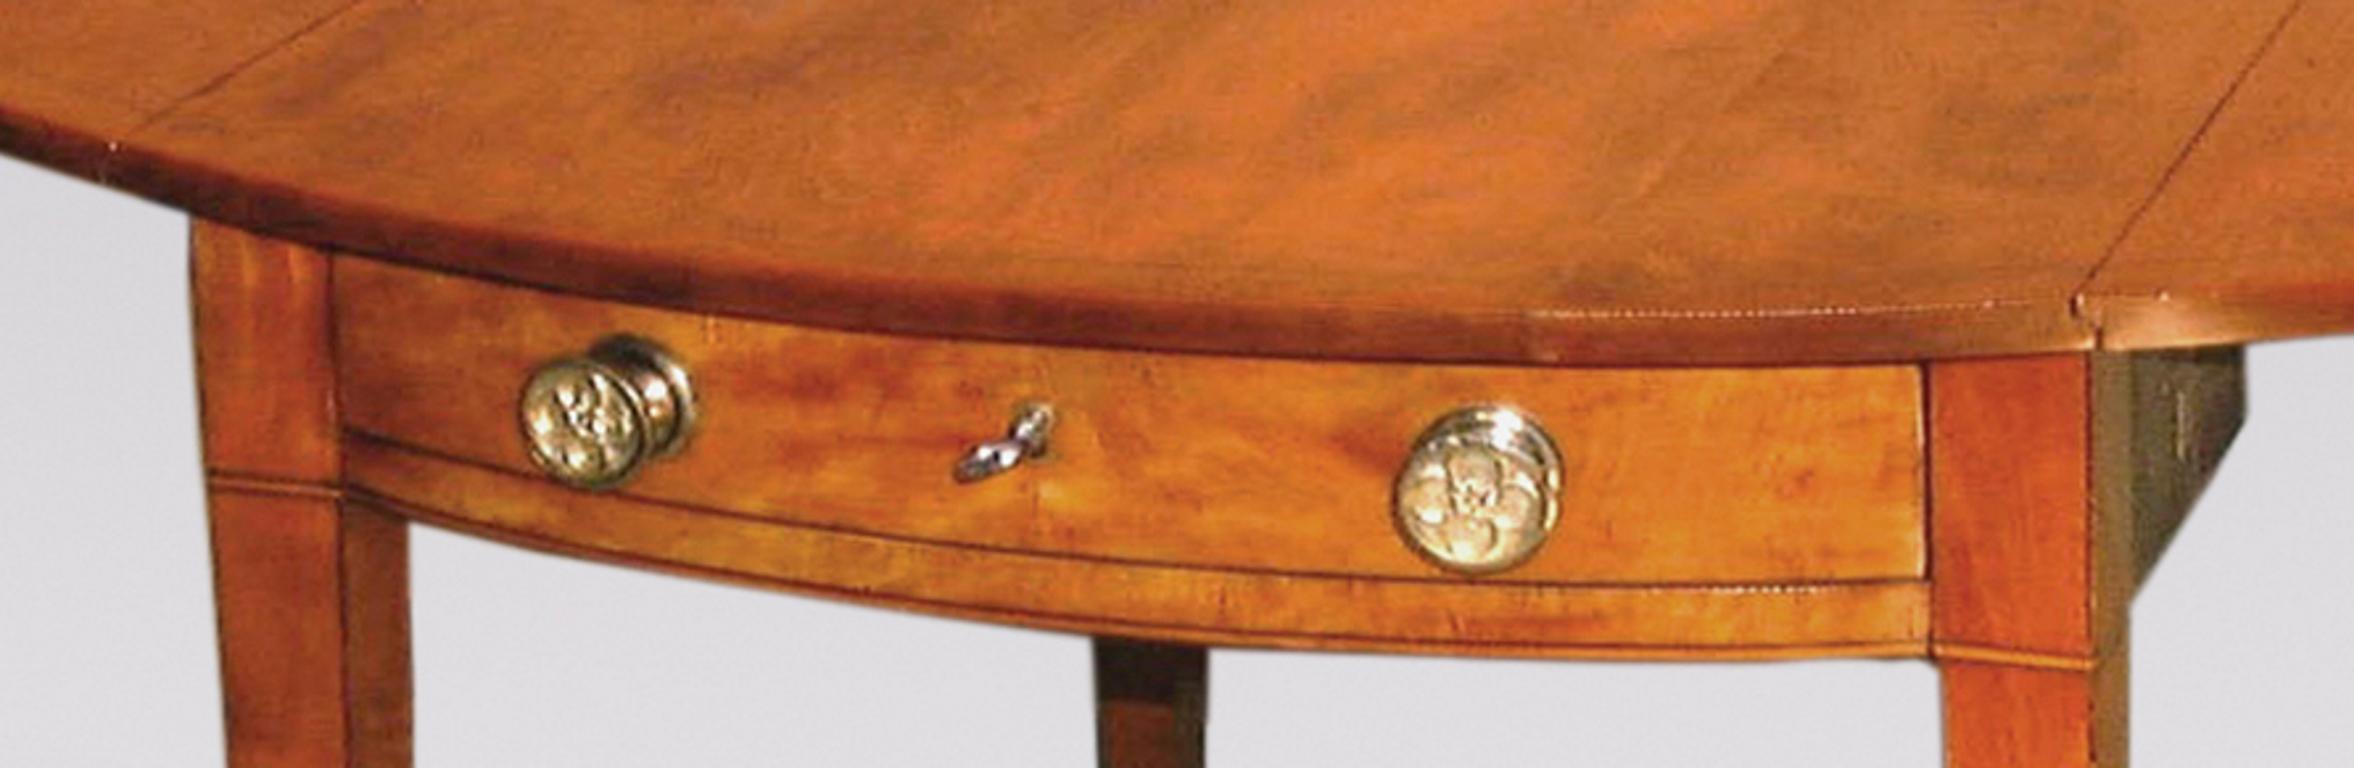 English 18th Century Sheraton Solid Satinwood Oval Pembroke Table For Sale